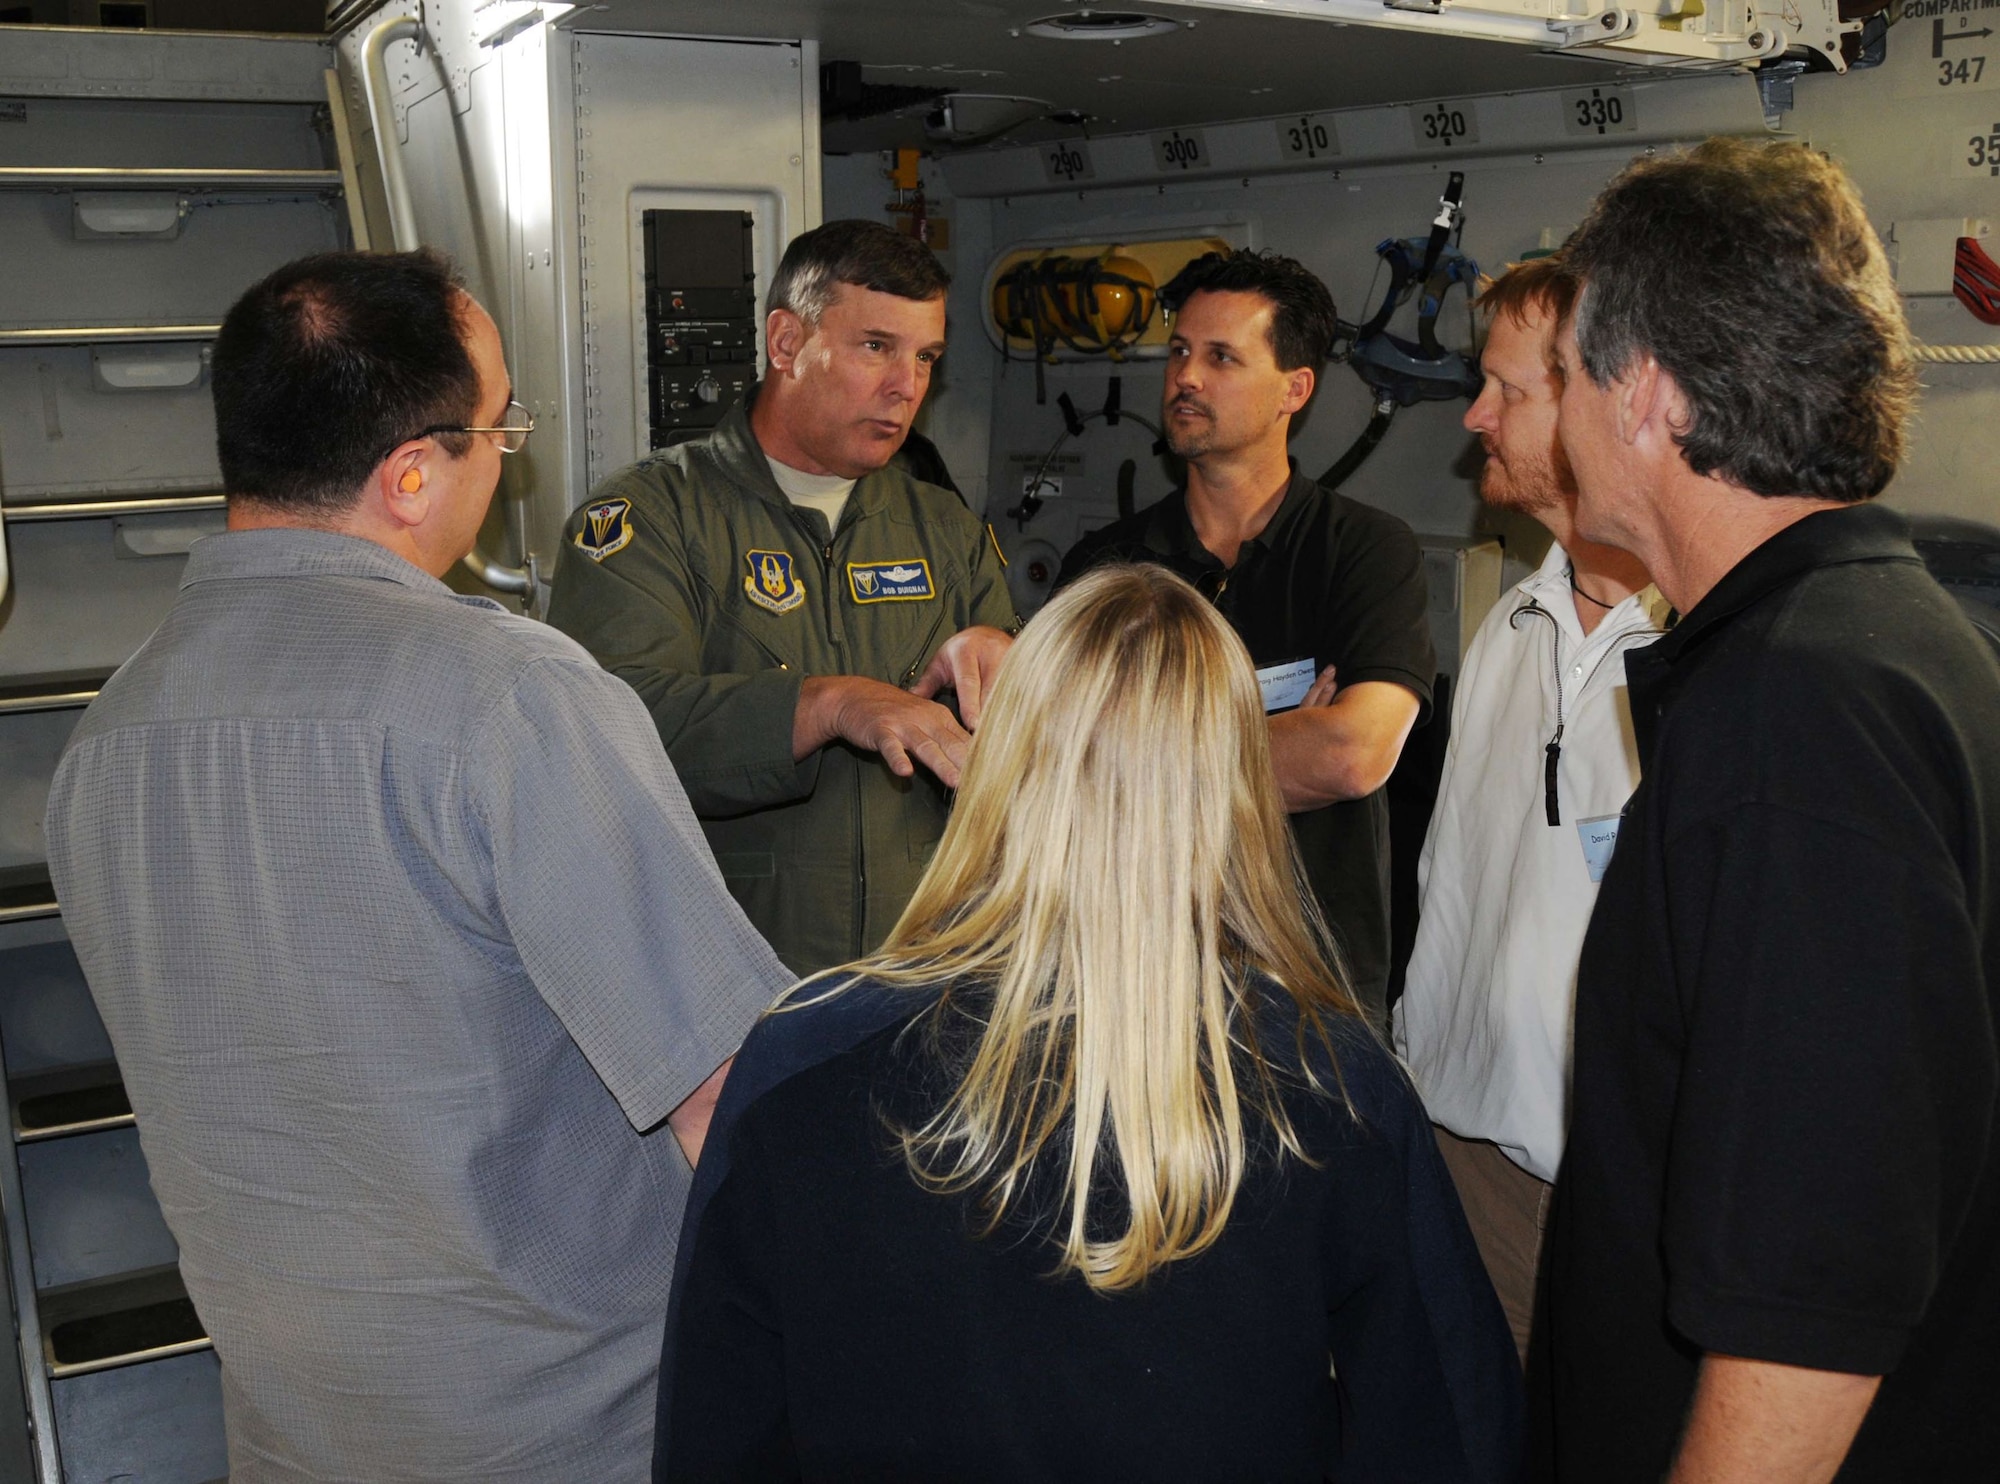 Maj. Gen. Robert E. Duignan, 4th Air Force commander explains to members of the entertainment industry the particulars of air refueling aboard a C-17. (U.S. Air Force photo by Lt. Col. Francisco Hamm)